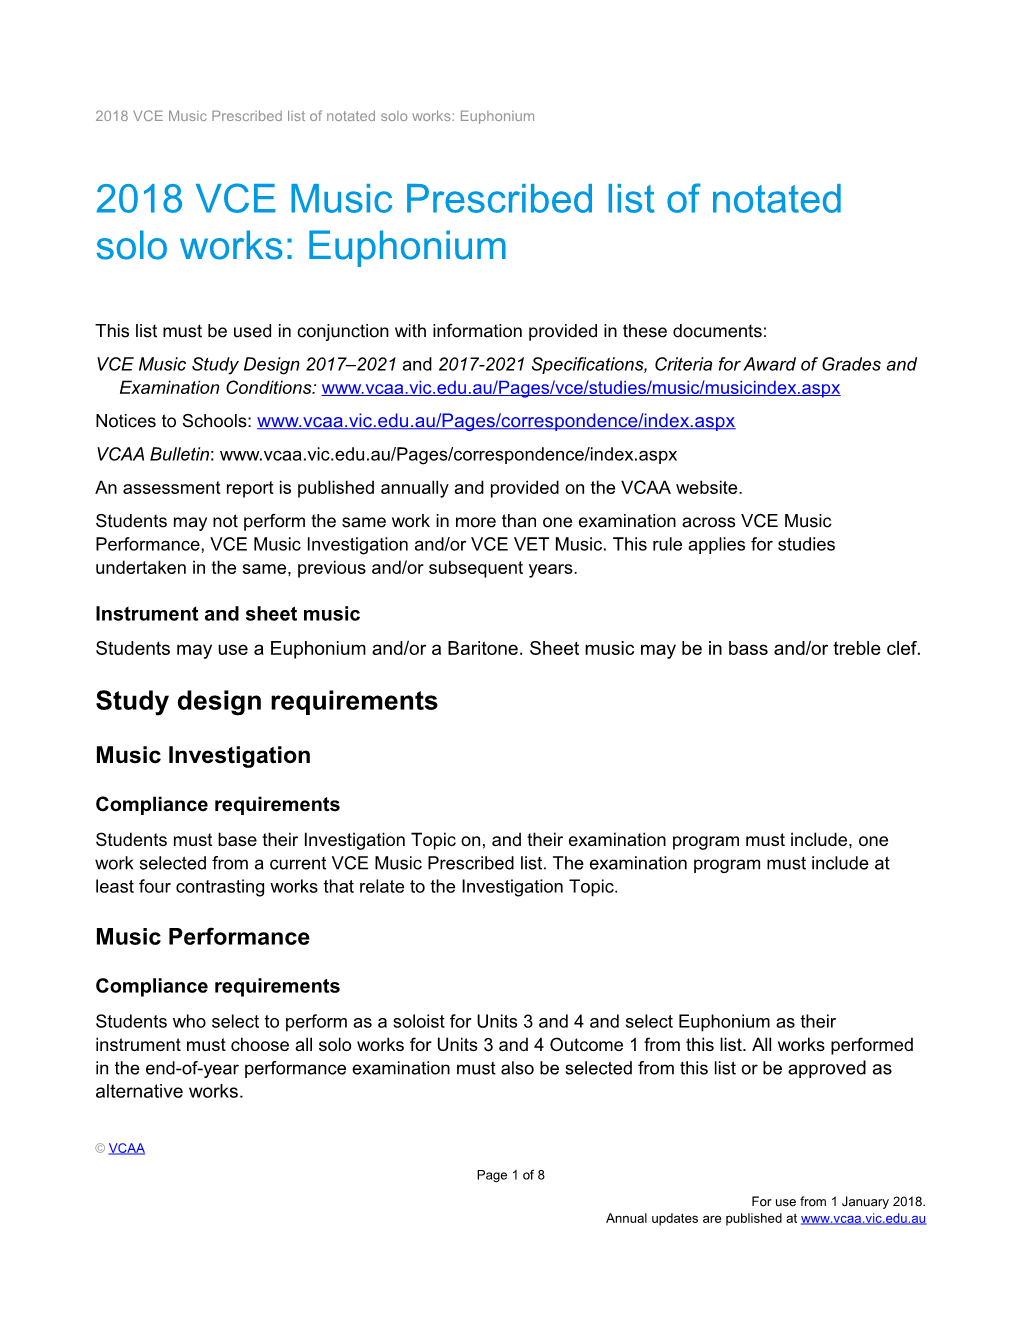 2018 VCE Music Prescribed List of Notated Solo Works: Euphonium